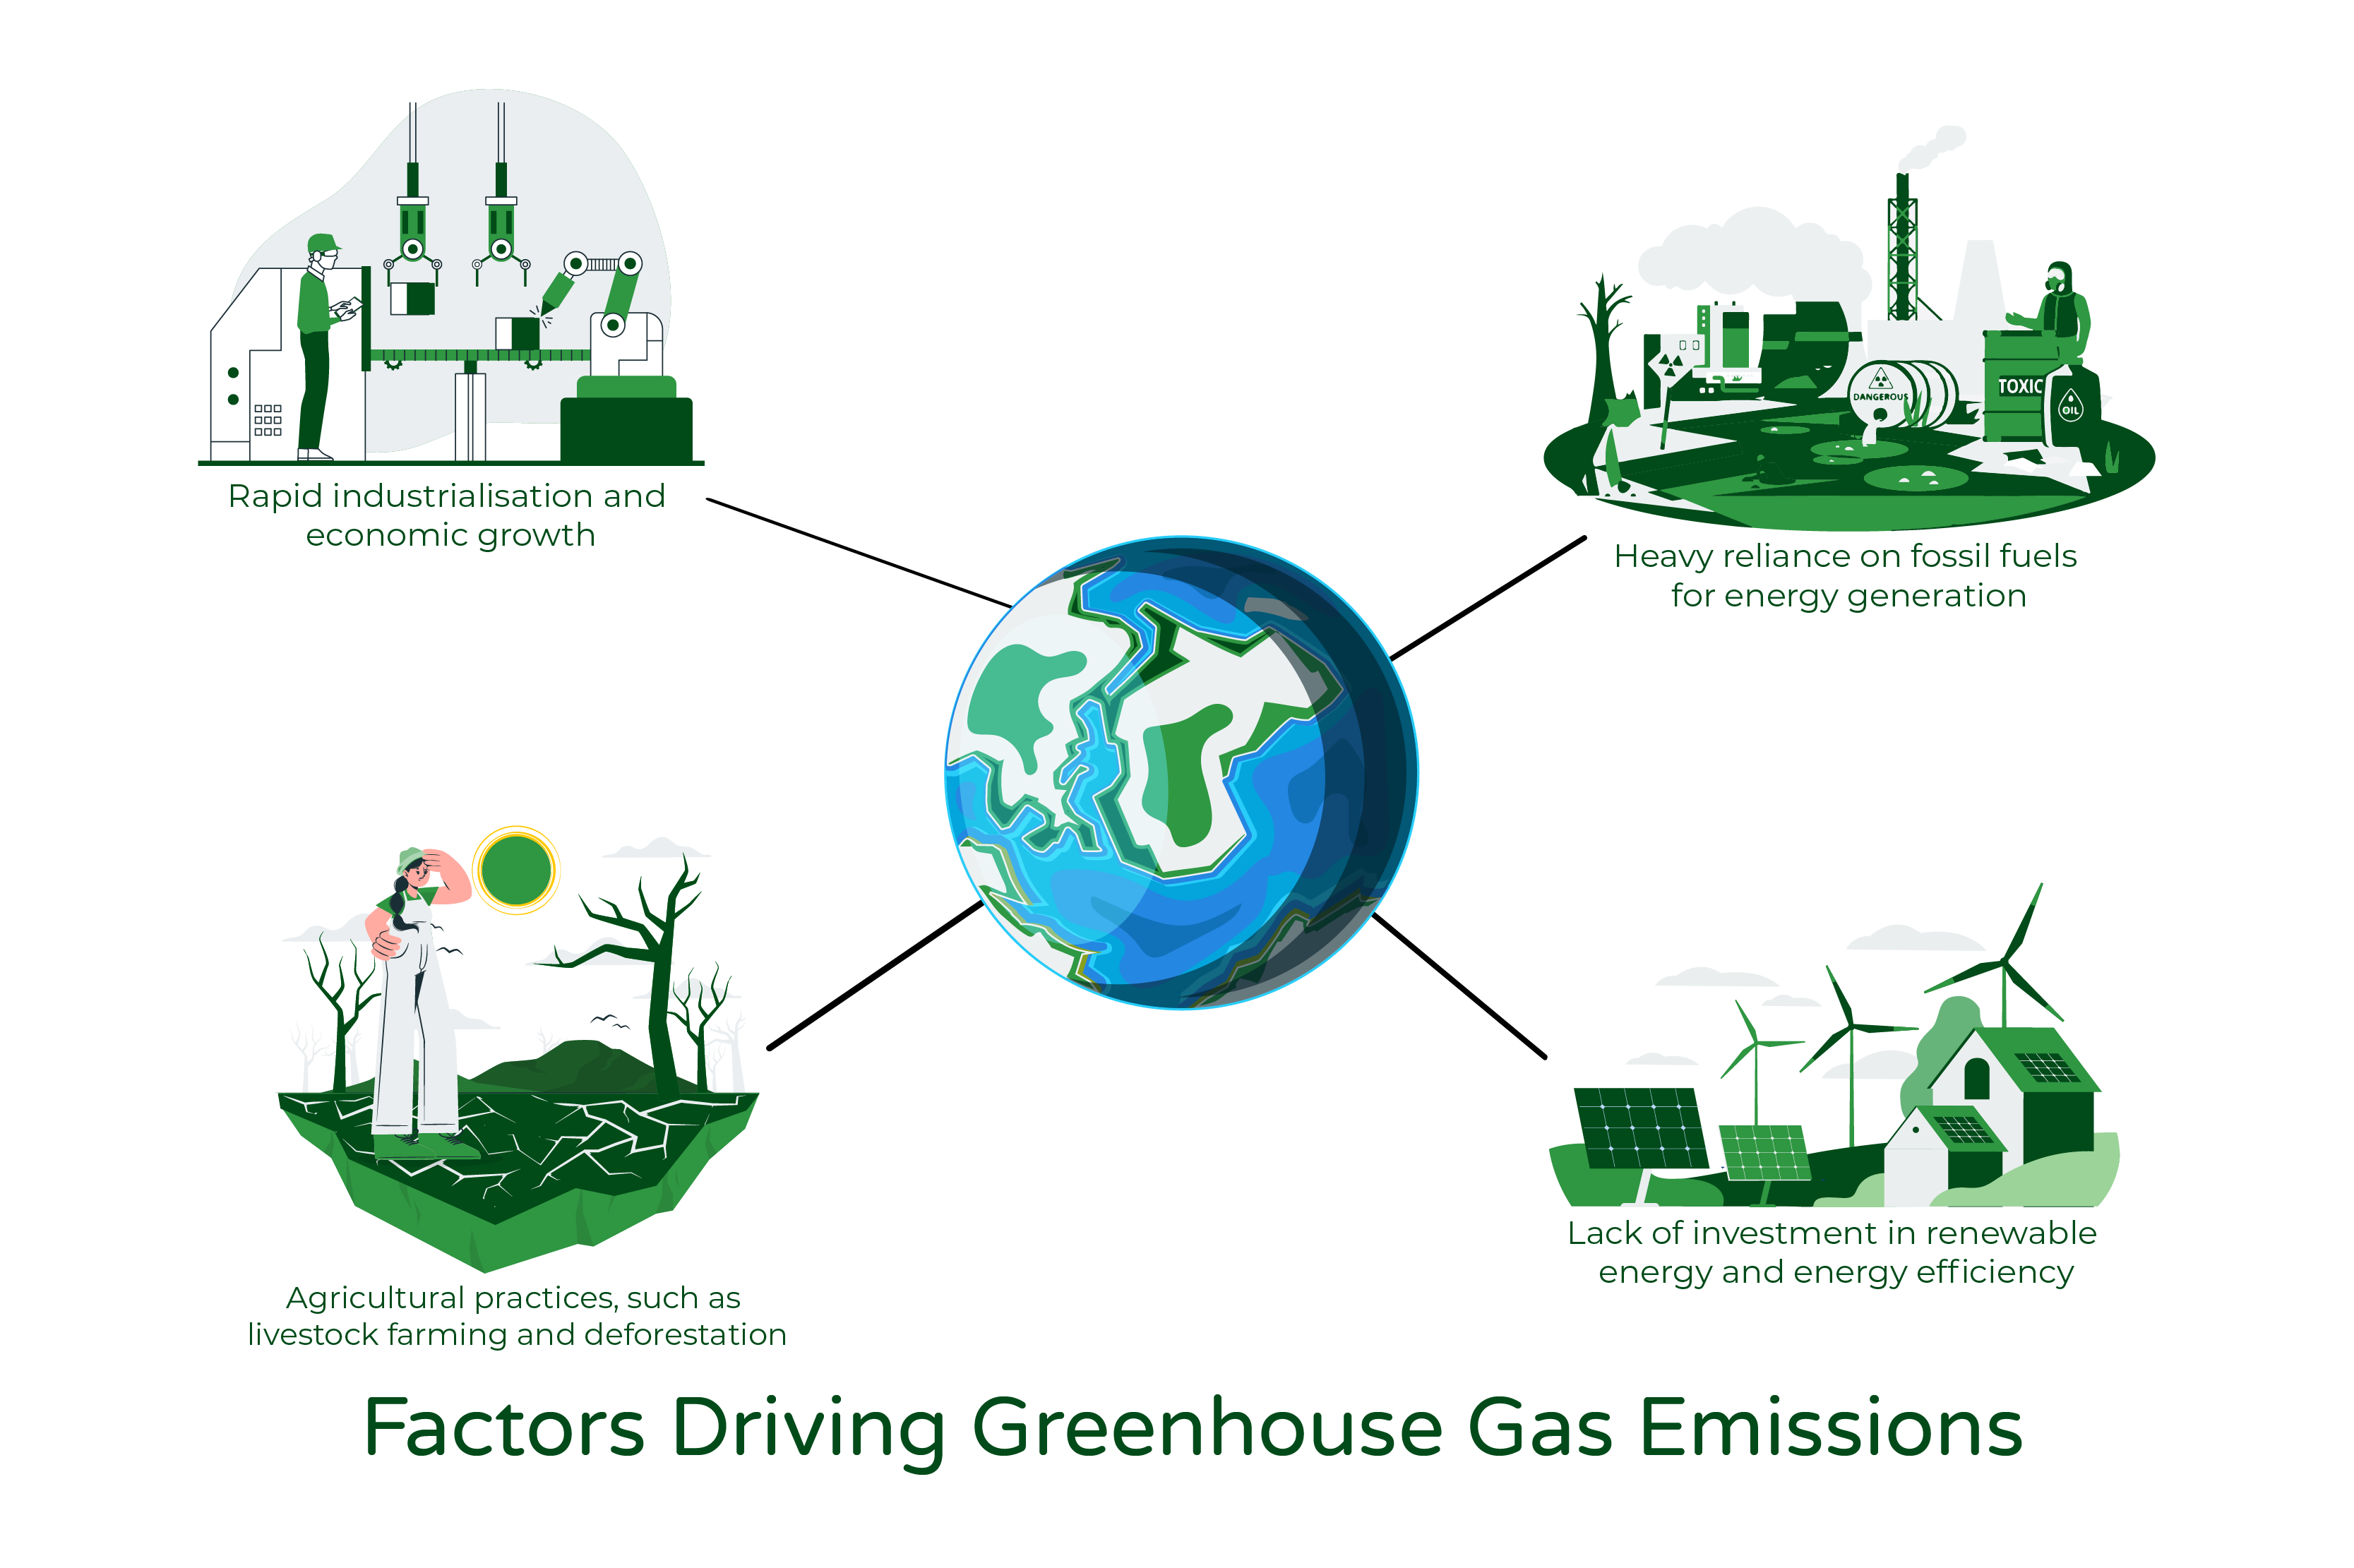 An image titled 'Which countries produce the most greenhouse gas emissions?' showing illustrations of famous landmarks representing four major countries: China (Great Wall of China), the USA (Statue of Liberty), India (Taj Mahal), and Russia (Saint Basil's Cathedral), along with six other countries. The image visually conveys that these countries are major contributors to global greenhouse gas emissions.